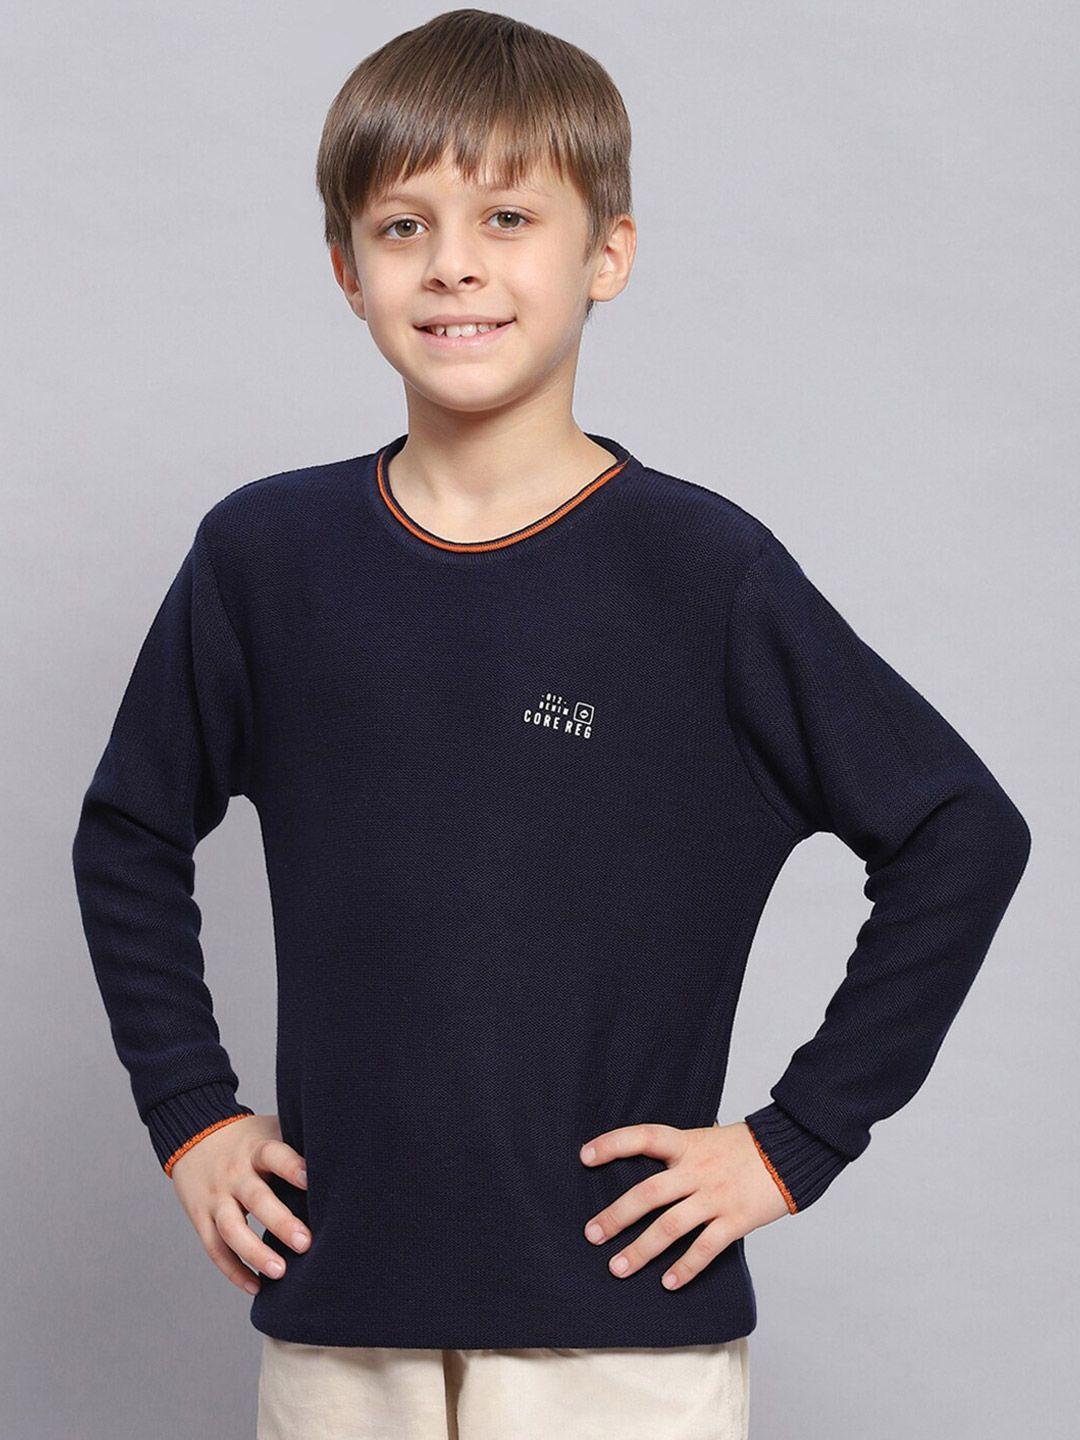 Monte Carlo Boys Long Sleeves Pure Cotton Pullover